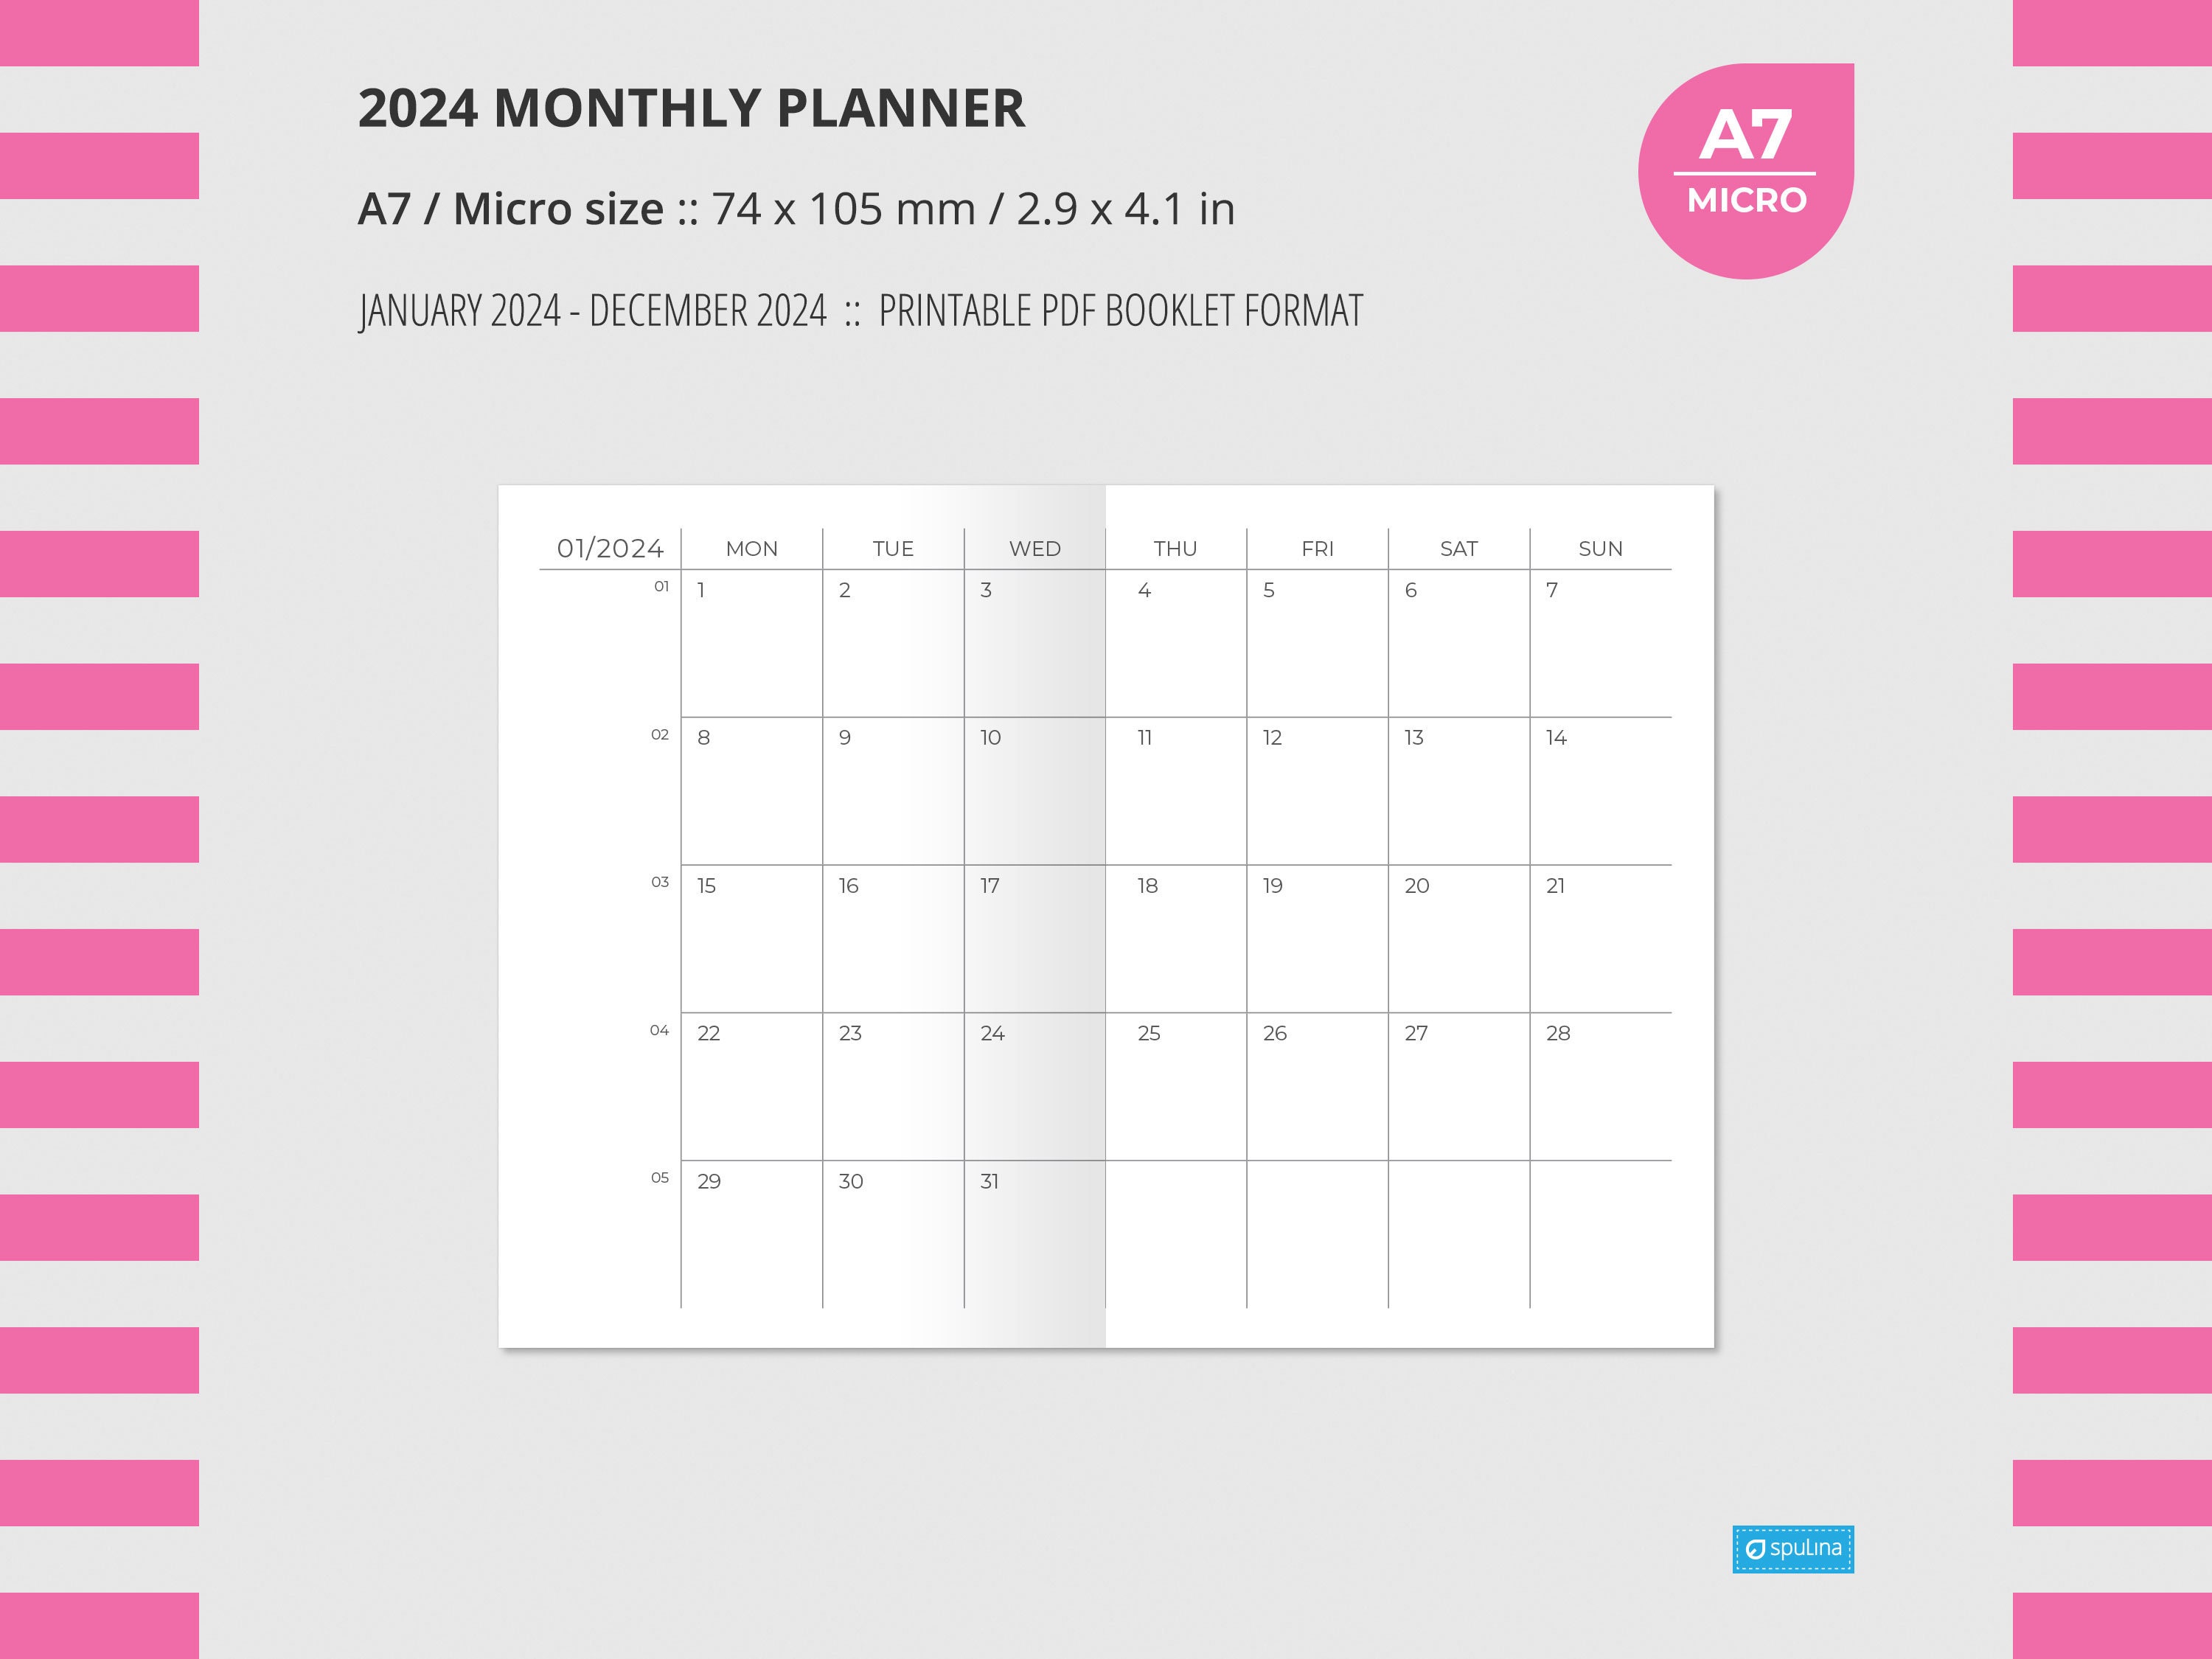  A7 Planner Refill Pocket Planner Refills 6 Ring Binder Refill  Blank Paper, A7 Agenda Refill 40 Sheets 100gsm Black Plain Paper-A7 3.23''  x 4.92'', Harphia : Office Products